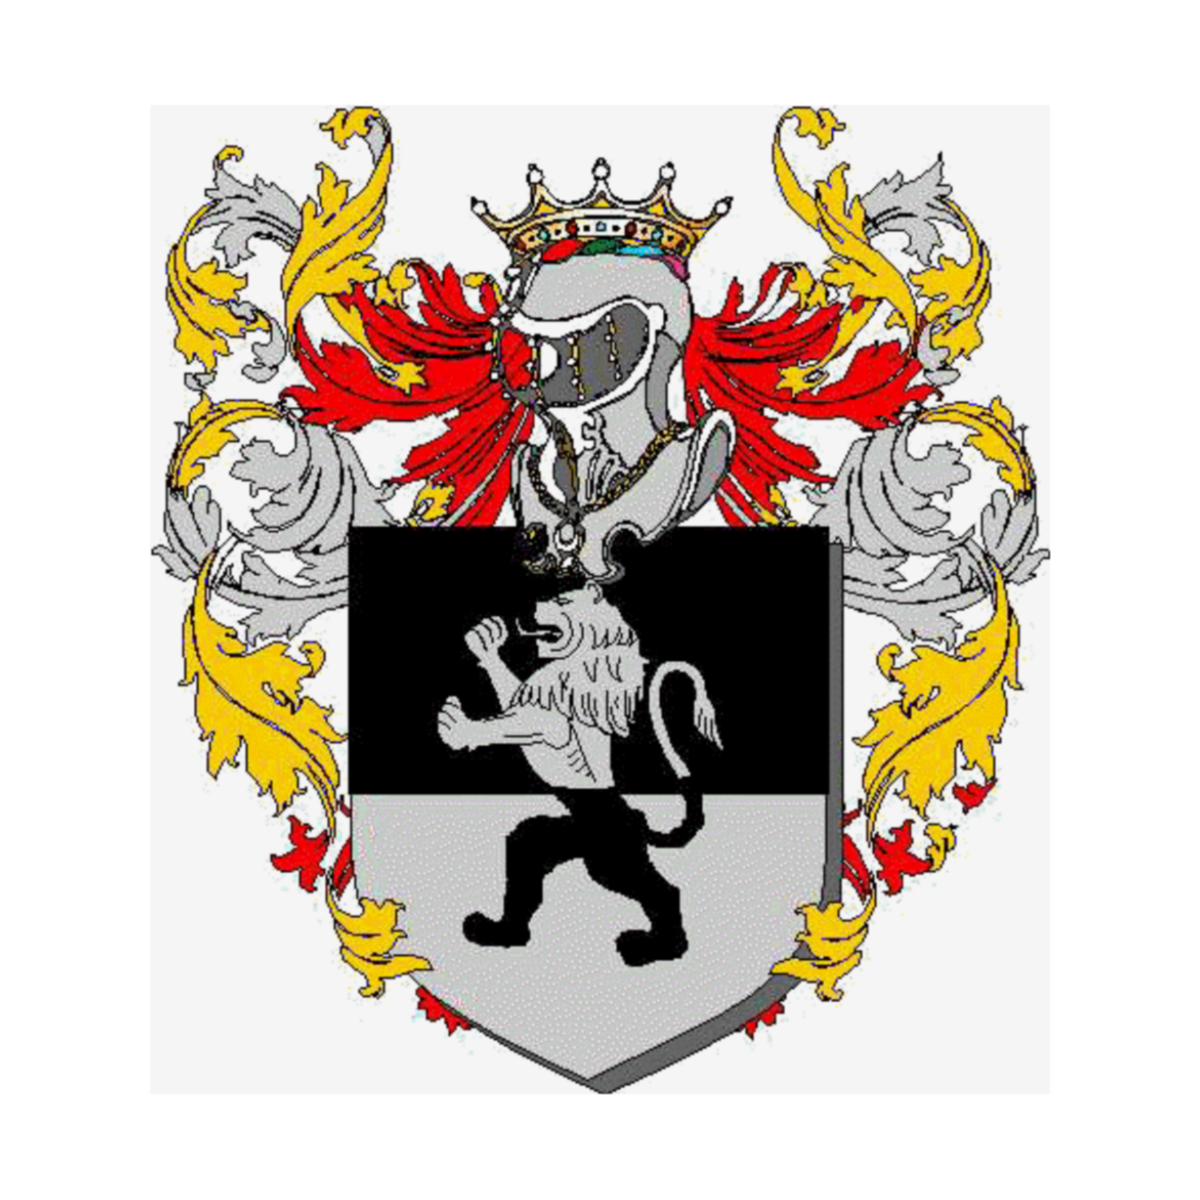 Coat of arms of family Faria